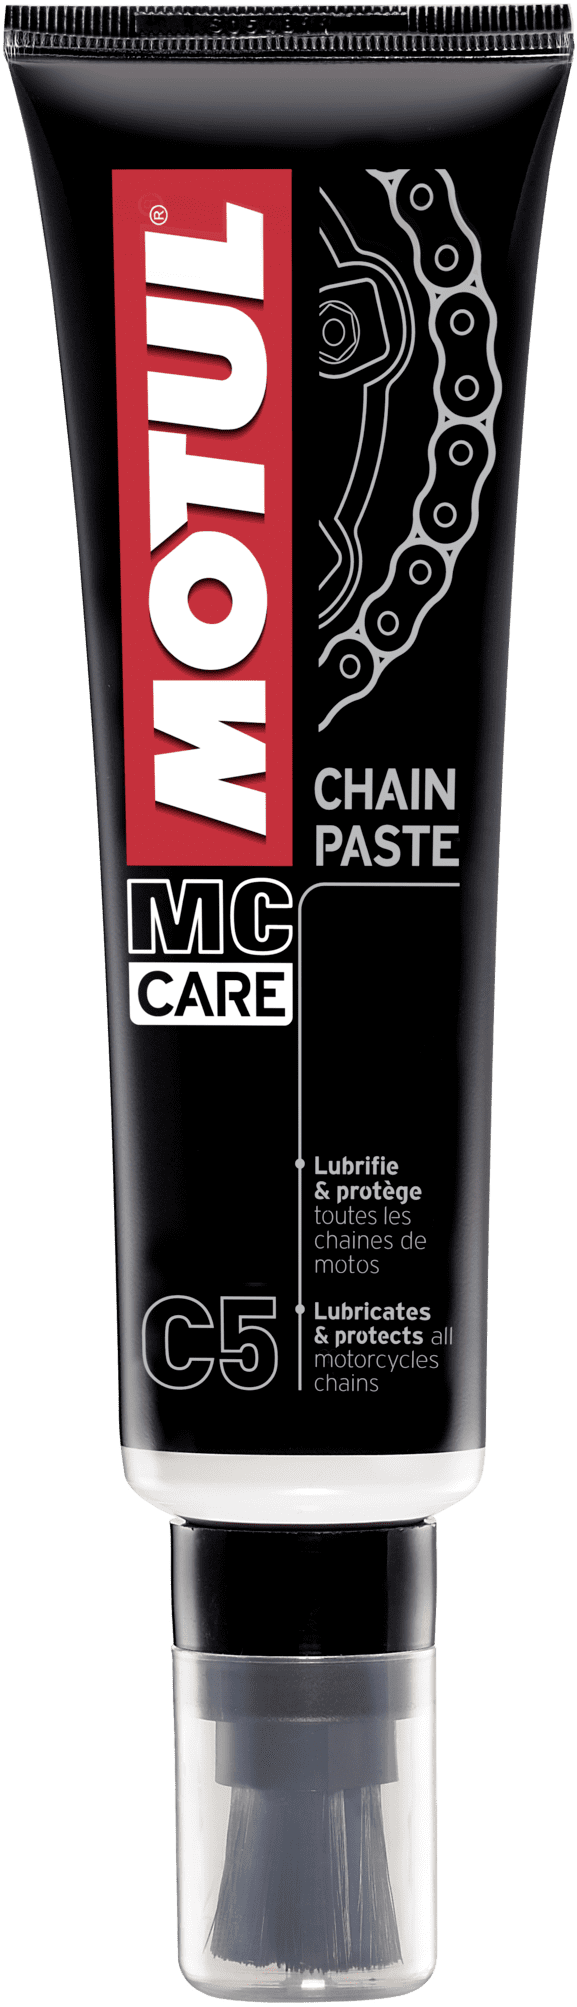 106513-150ML Each part of the motorcycle needs specific care. Launched in 2011, MOTUL® MC Care™ line has been developed to fully maintain and care for the motorcycle, the motorcyclist and their equipment.